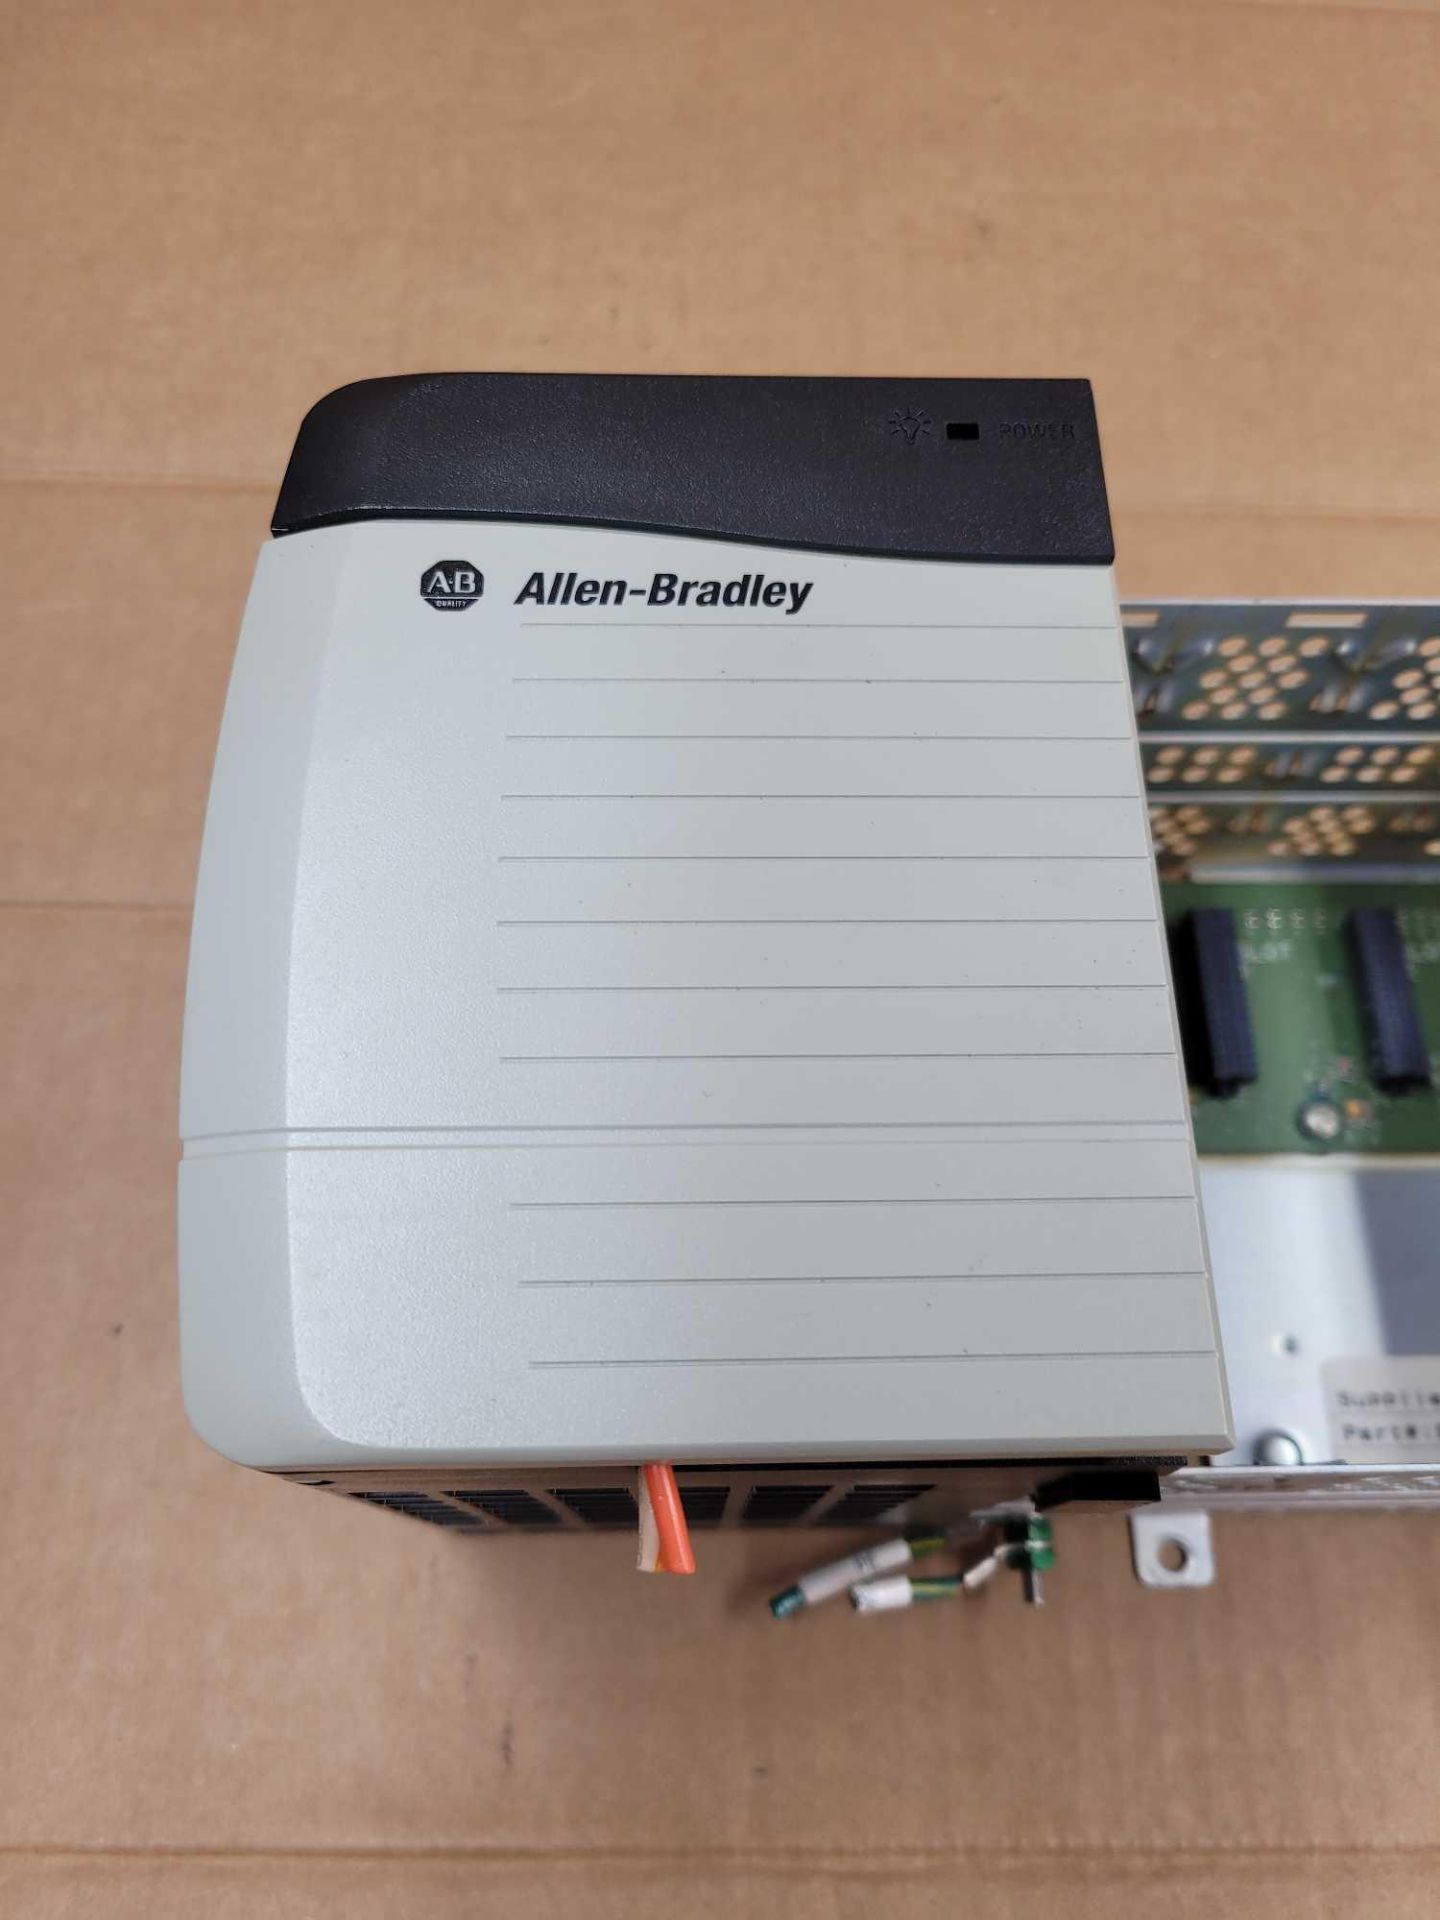 ALLEN BRADLEY 1756-PA75 with 1756-A10 / Series B ControlLogix Power Supply with Series B 10 Slot PLC - Image 3 of 9